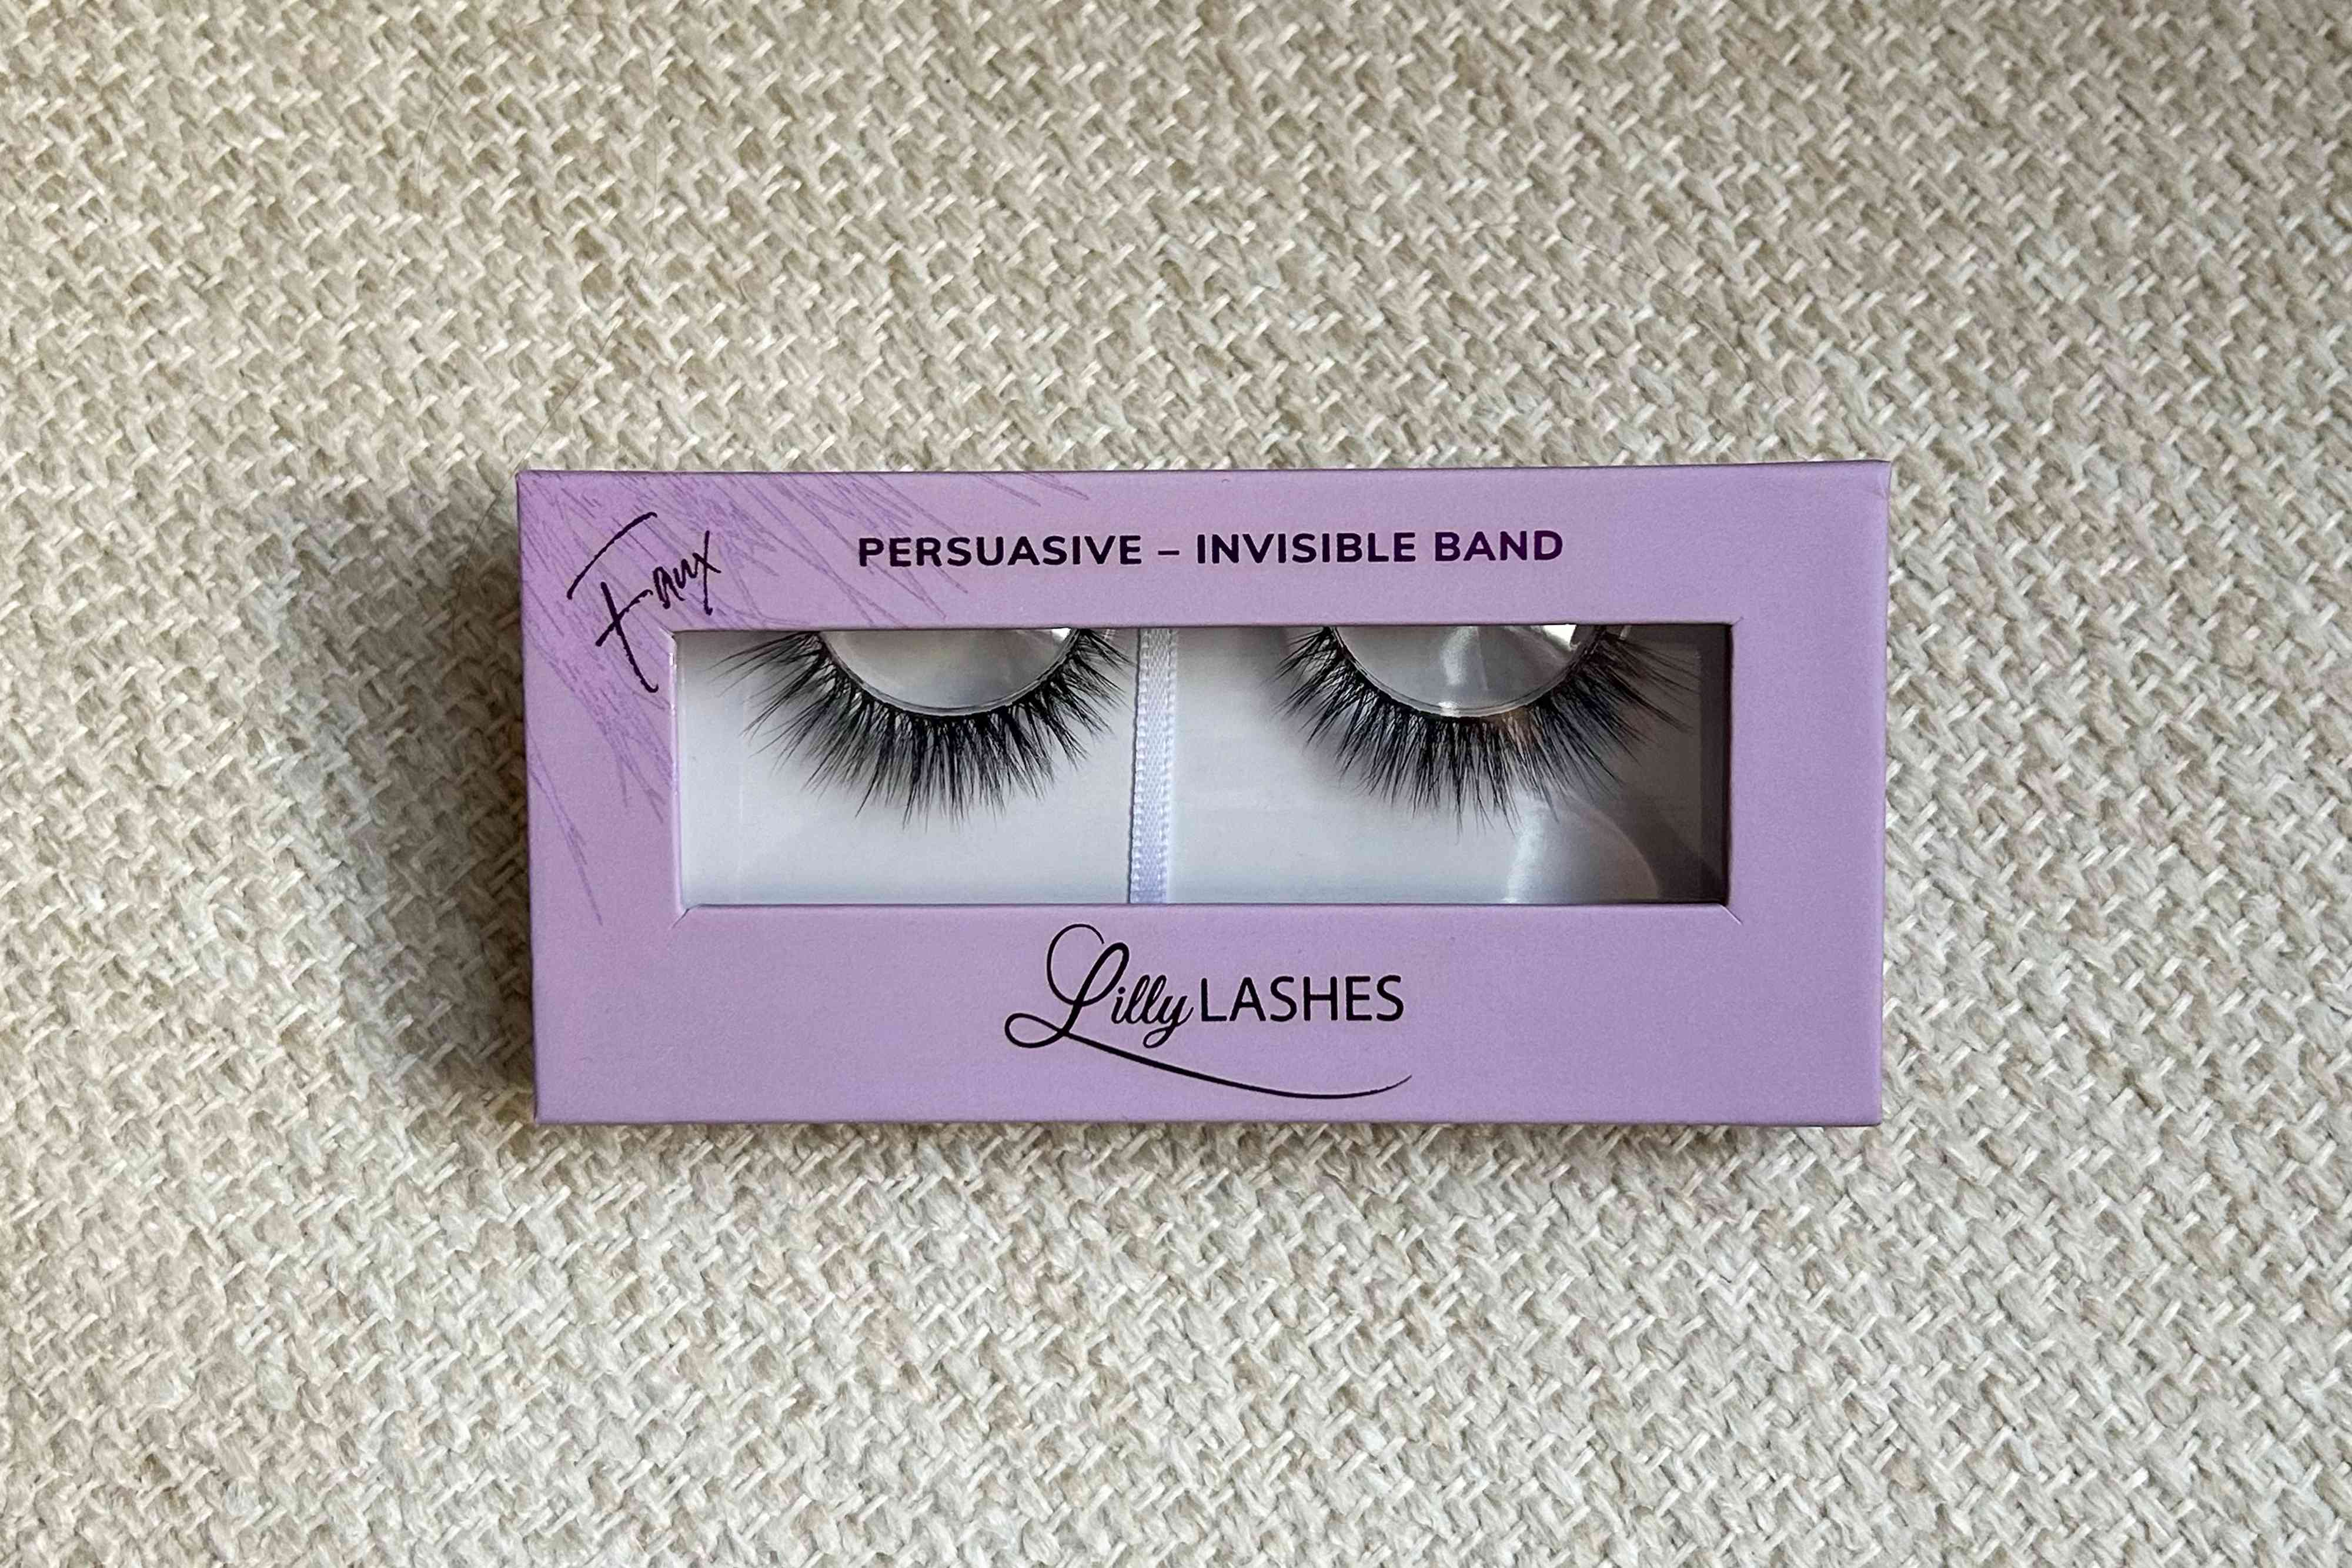 Lily Lashes Persuasive Lashes on a flat patterned surface